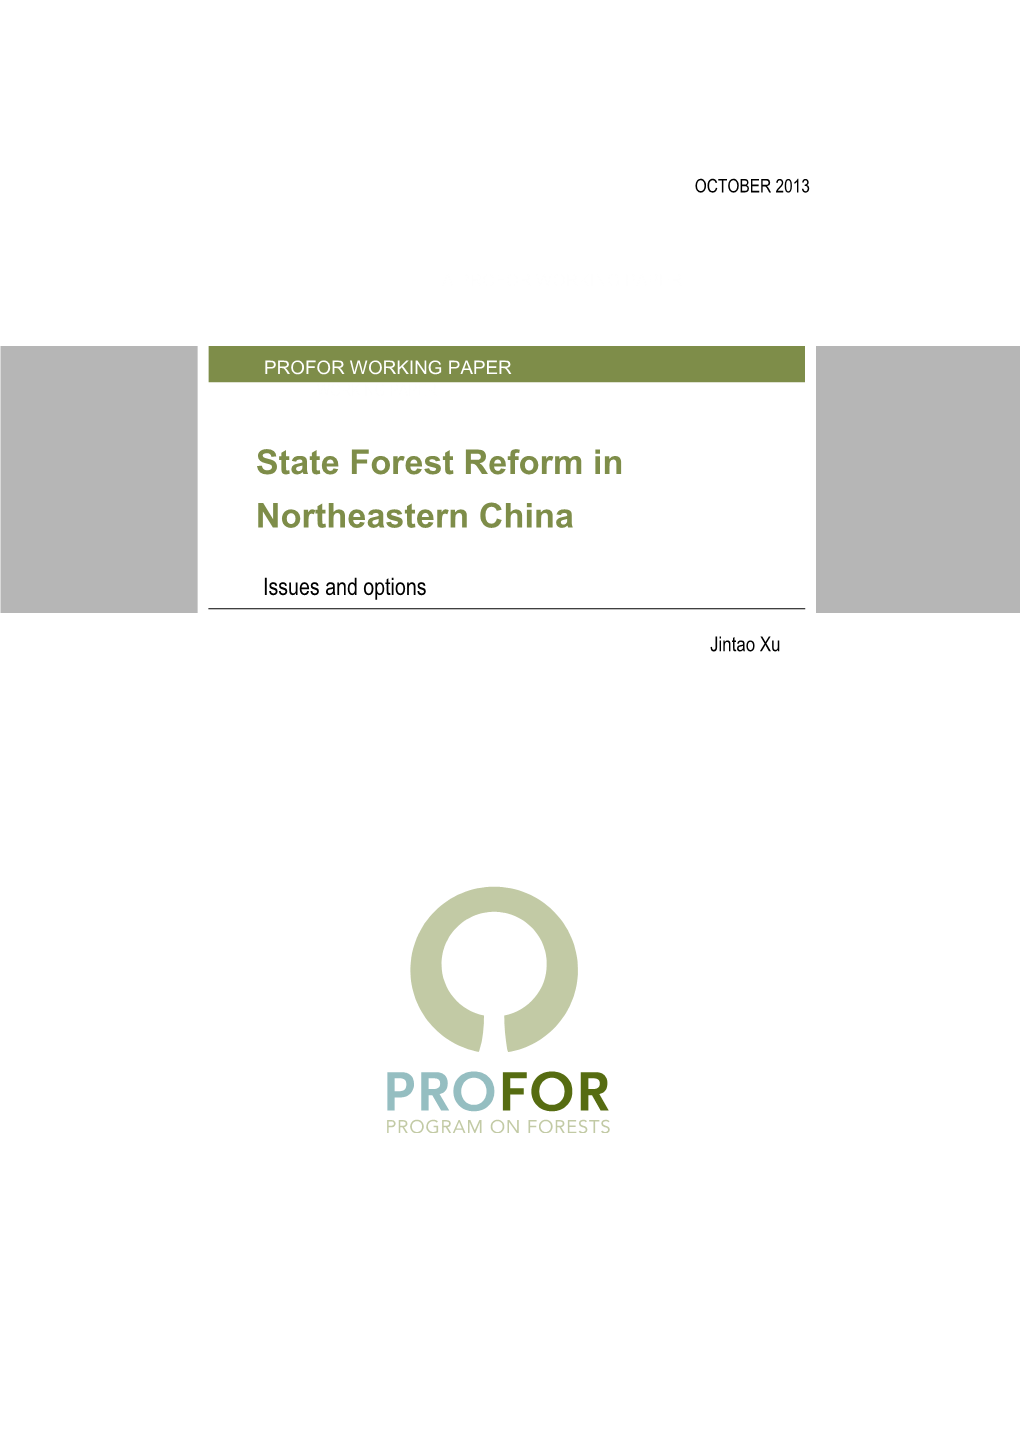 State Forest Reform in Northeastern China